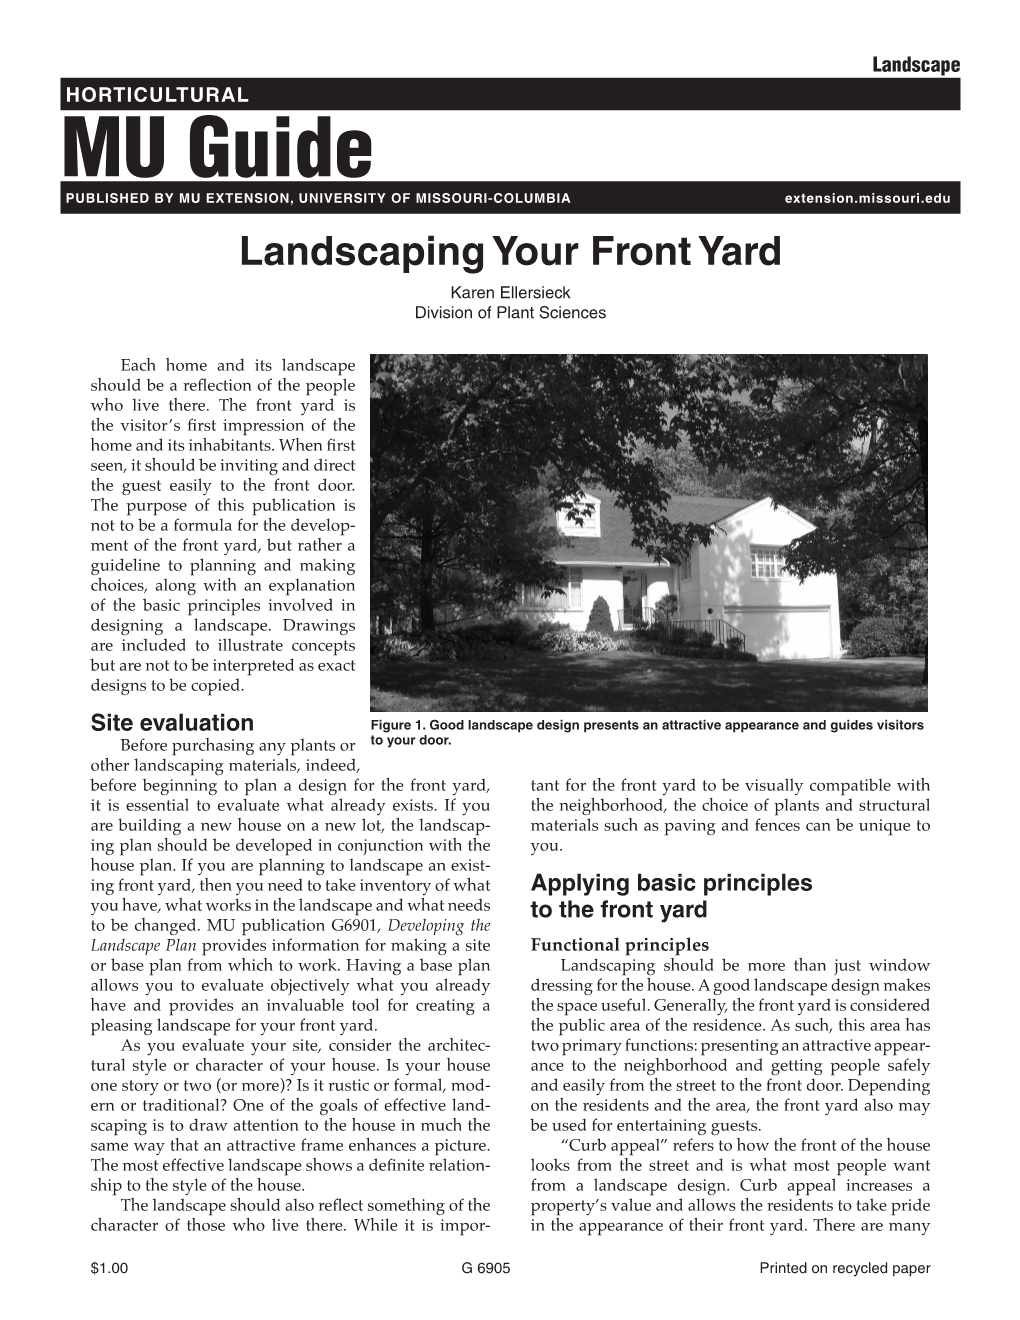 MU Guide PUBLISHED by MU EXTENSION, UNIVERSITY of MISSOURI-COLUMBIA Extension.Missouri.Edu Landscaping Your Front Yard Karen Ellersieck Division of Plant Sciences